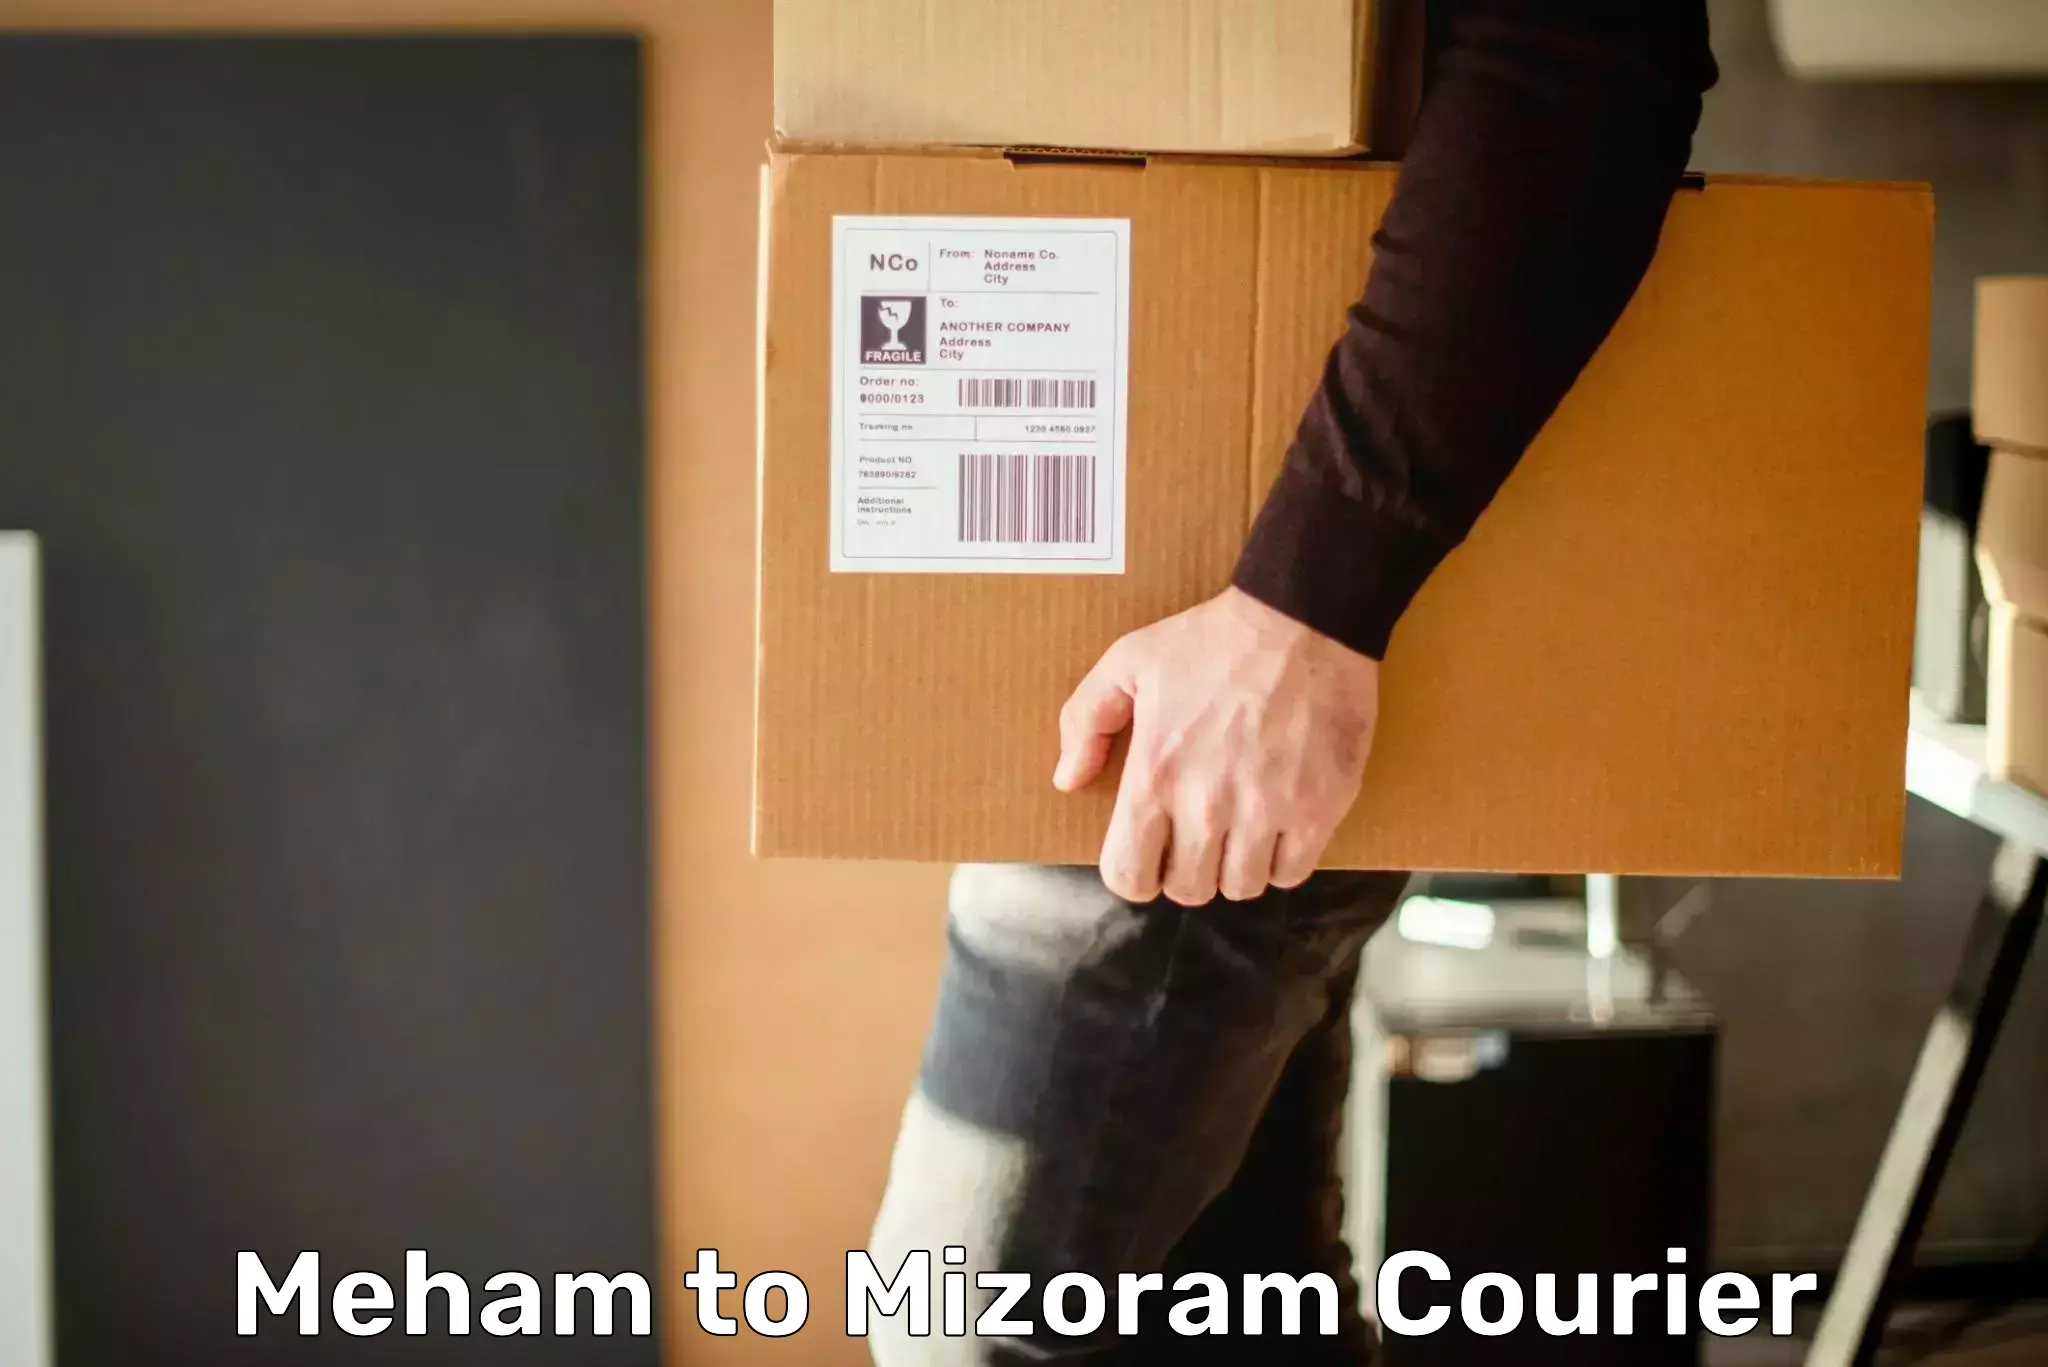 Reliable delivery network Meham to Mizoram